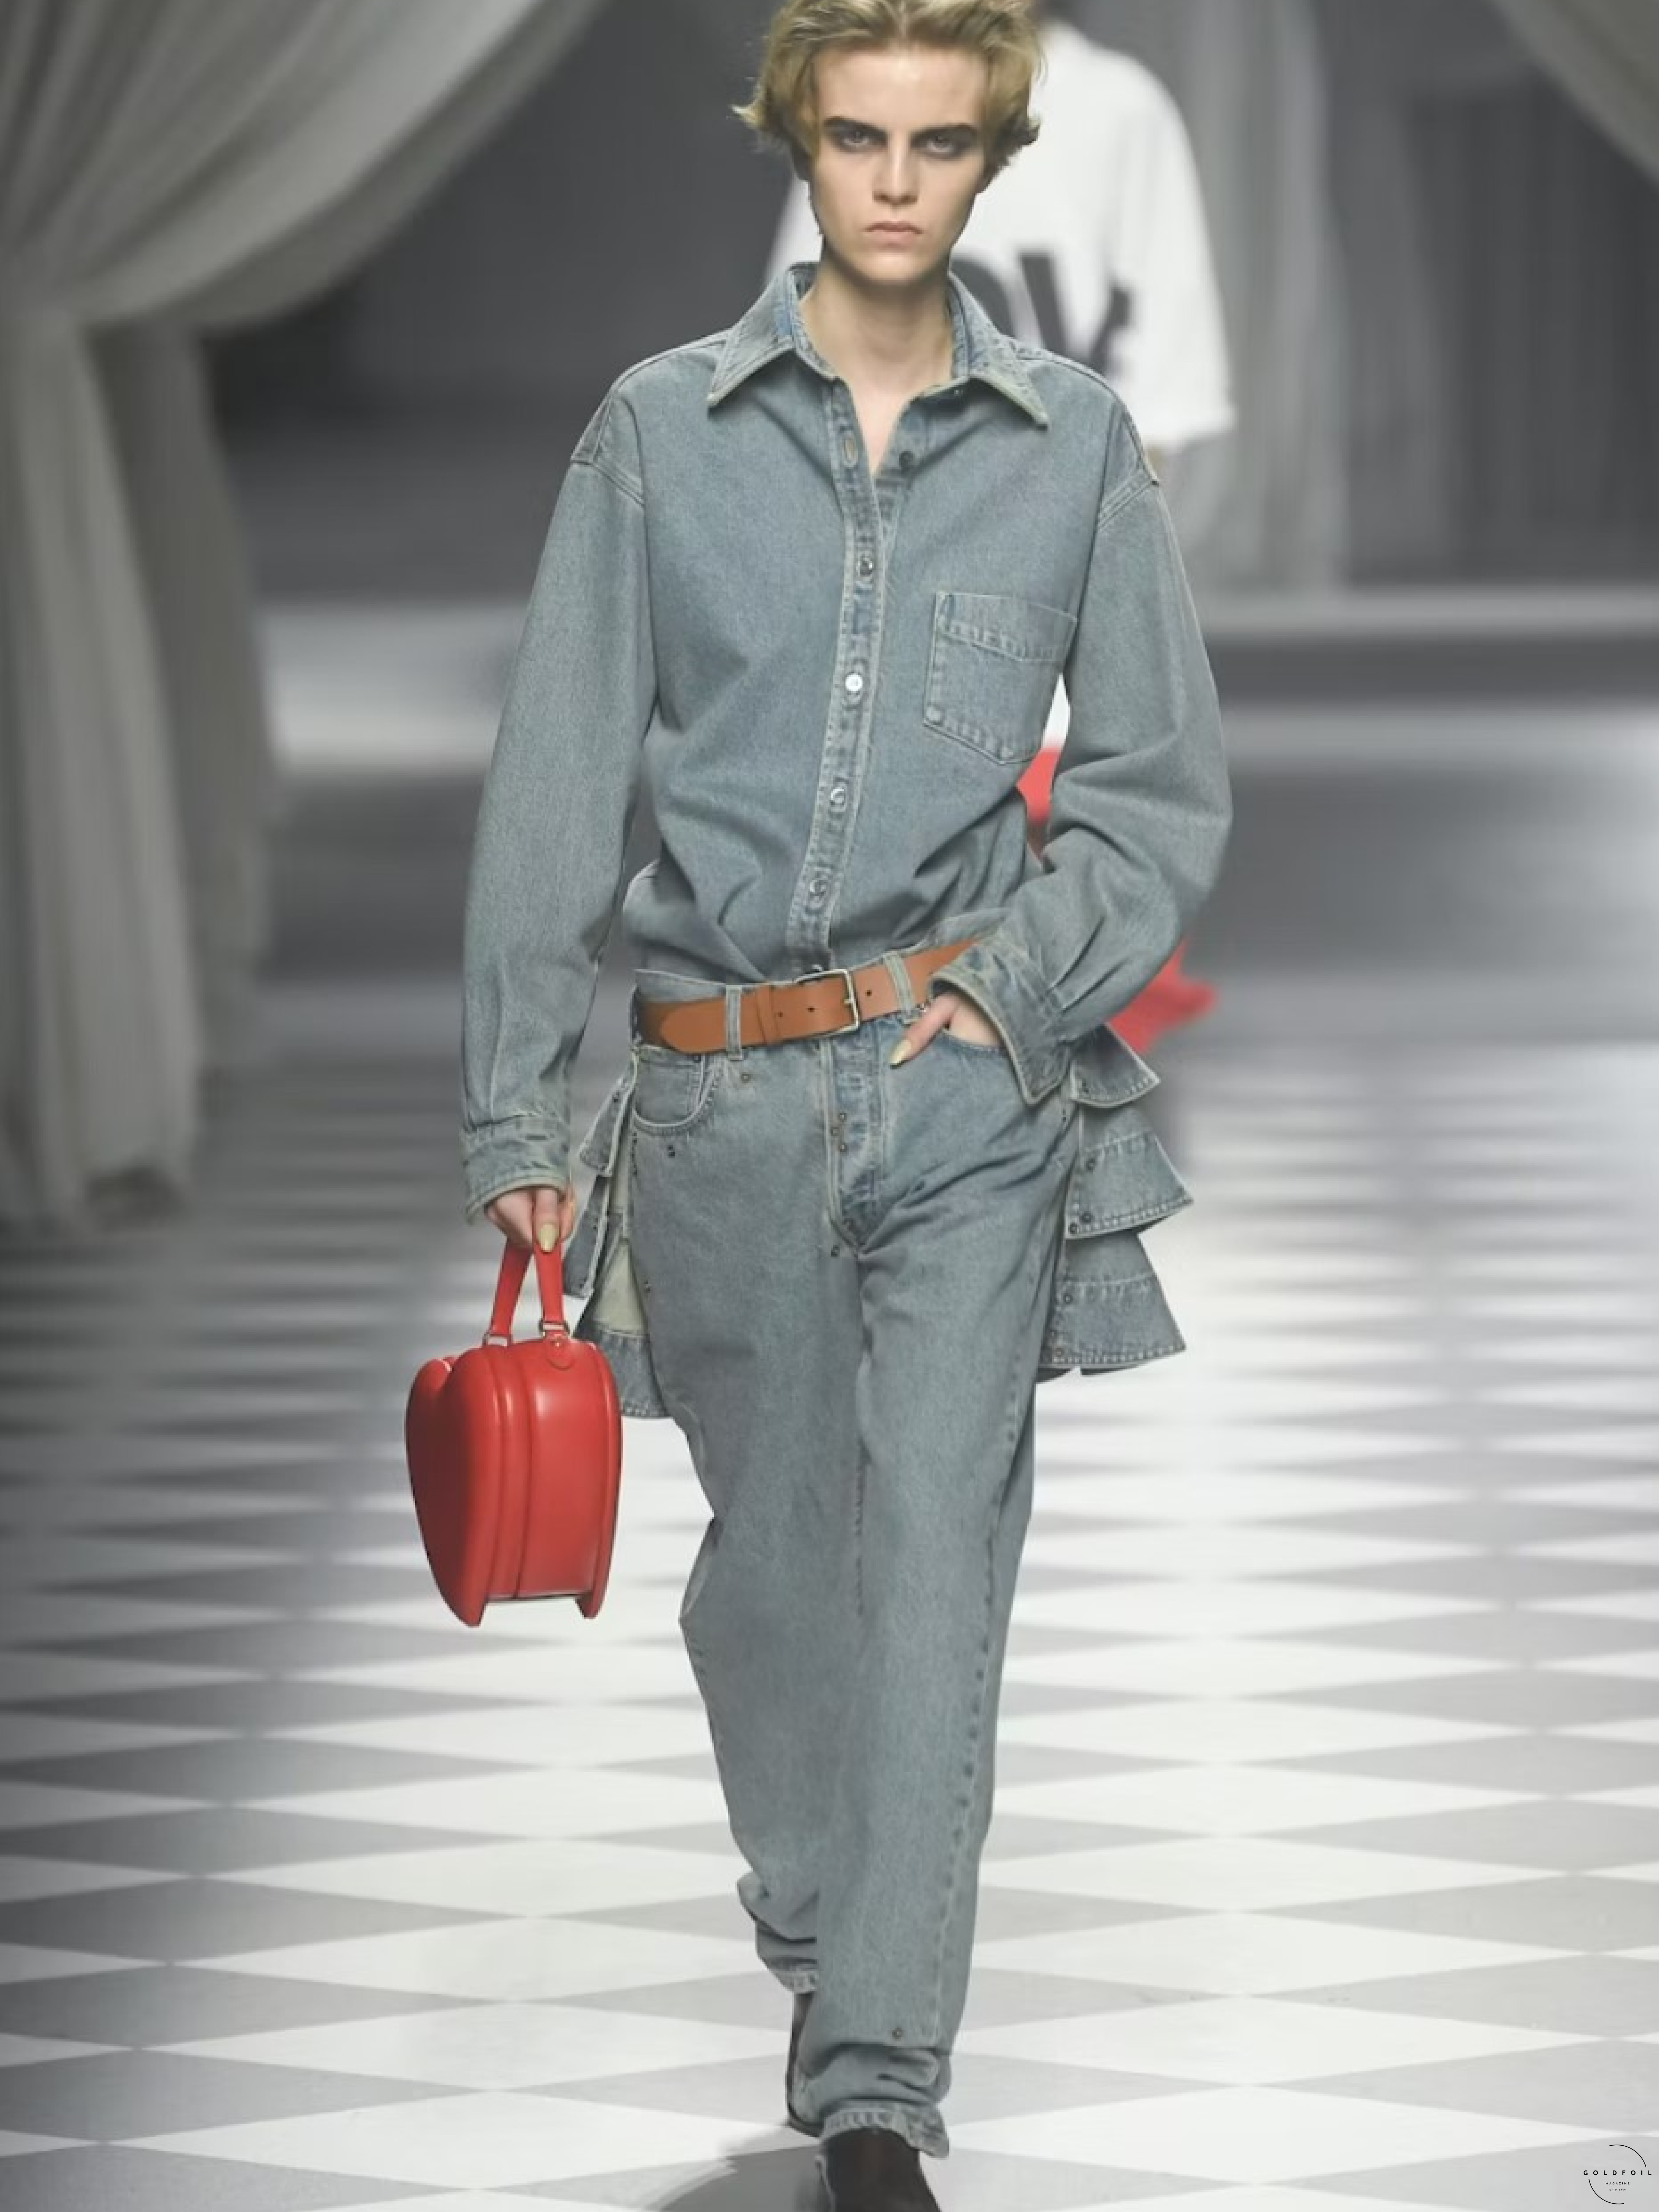 Adrian Appiolaza presented his first runway show for the Moschino brand as part of Milan Fashion Week.